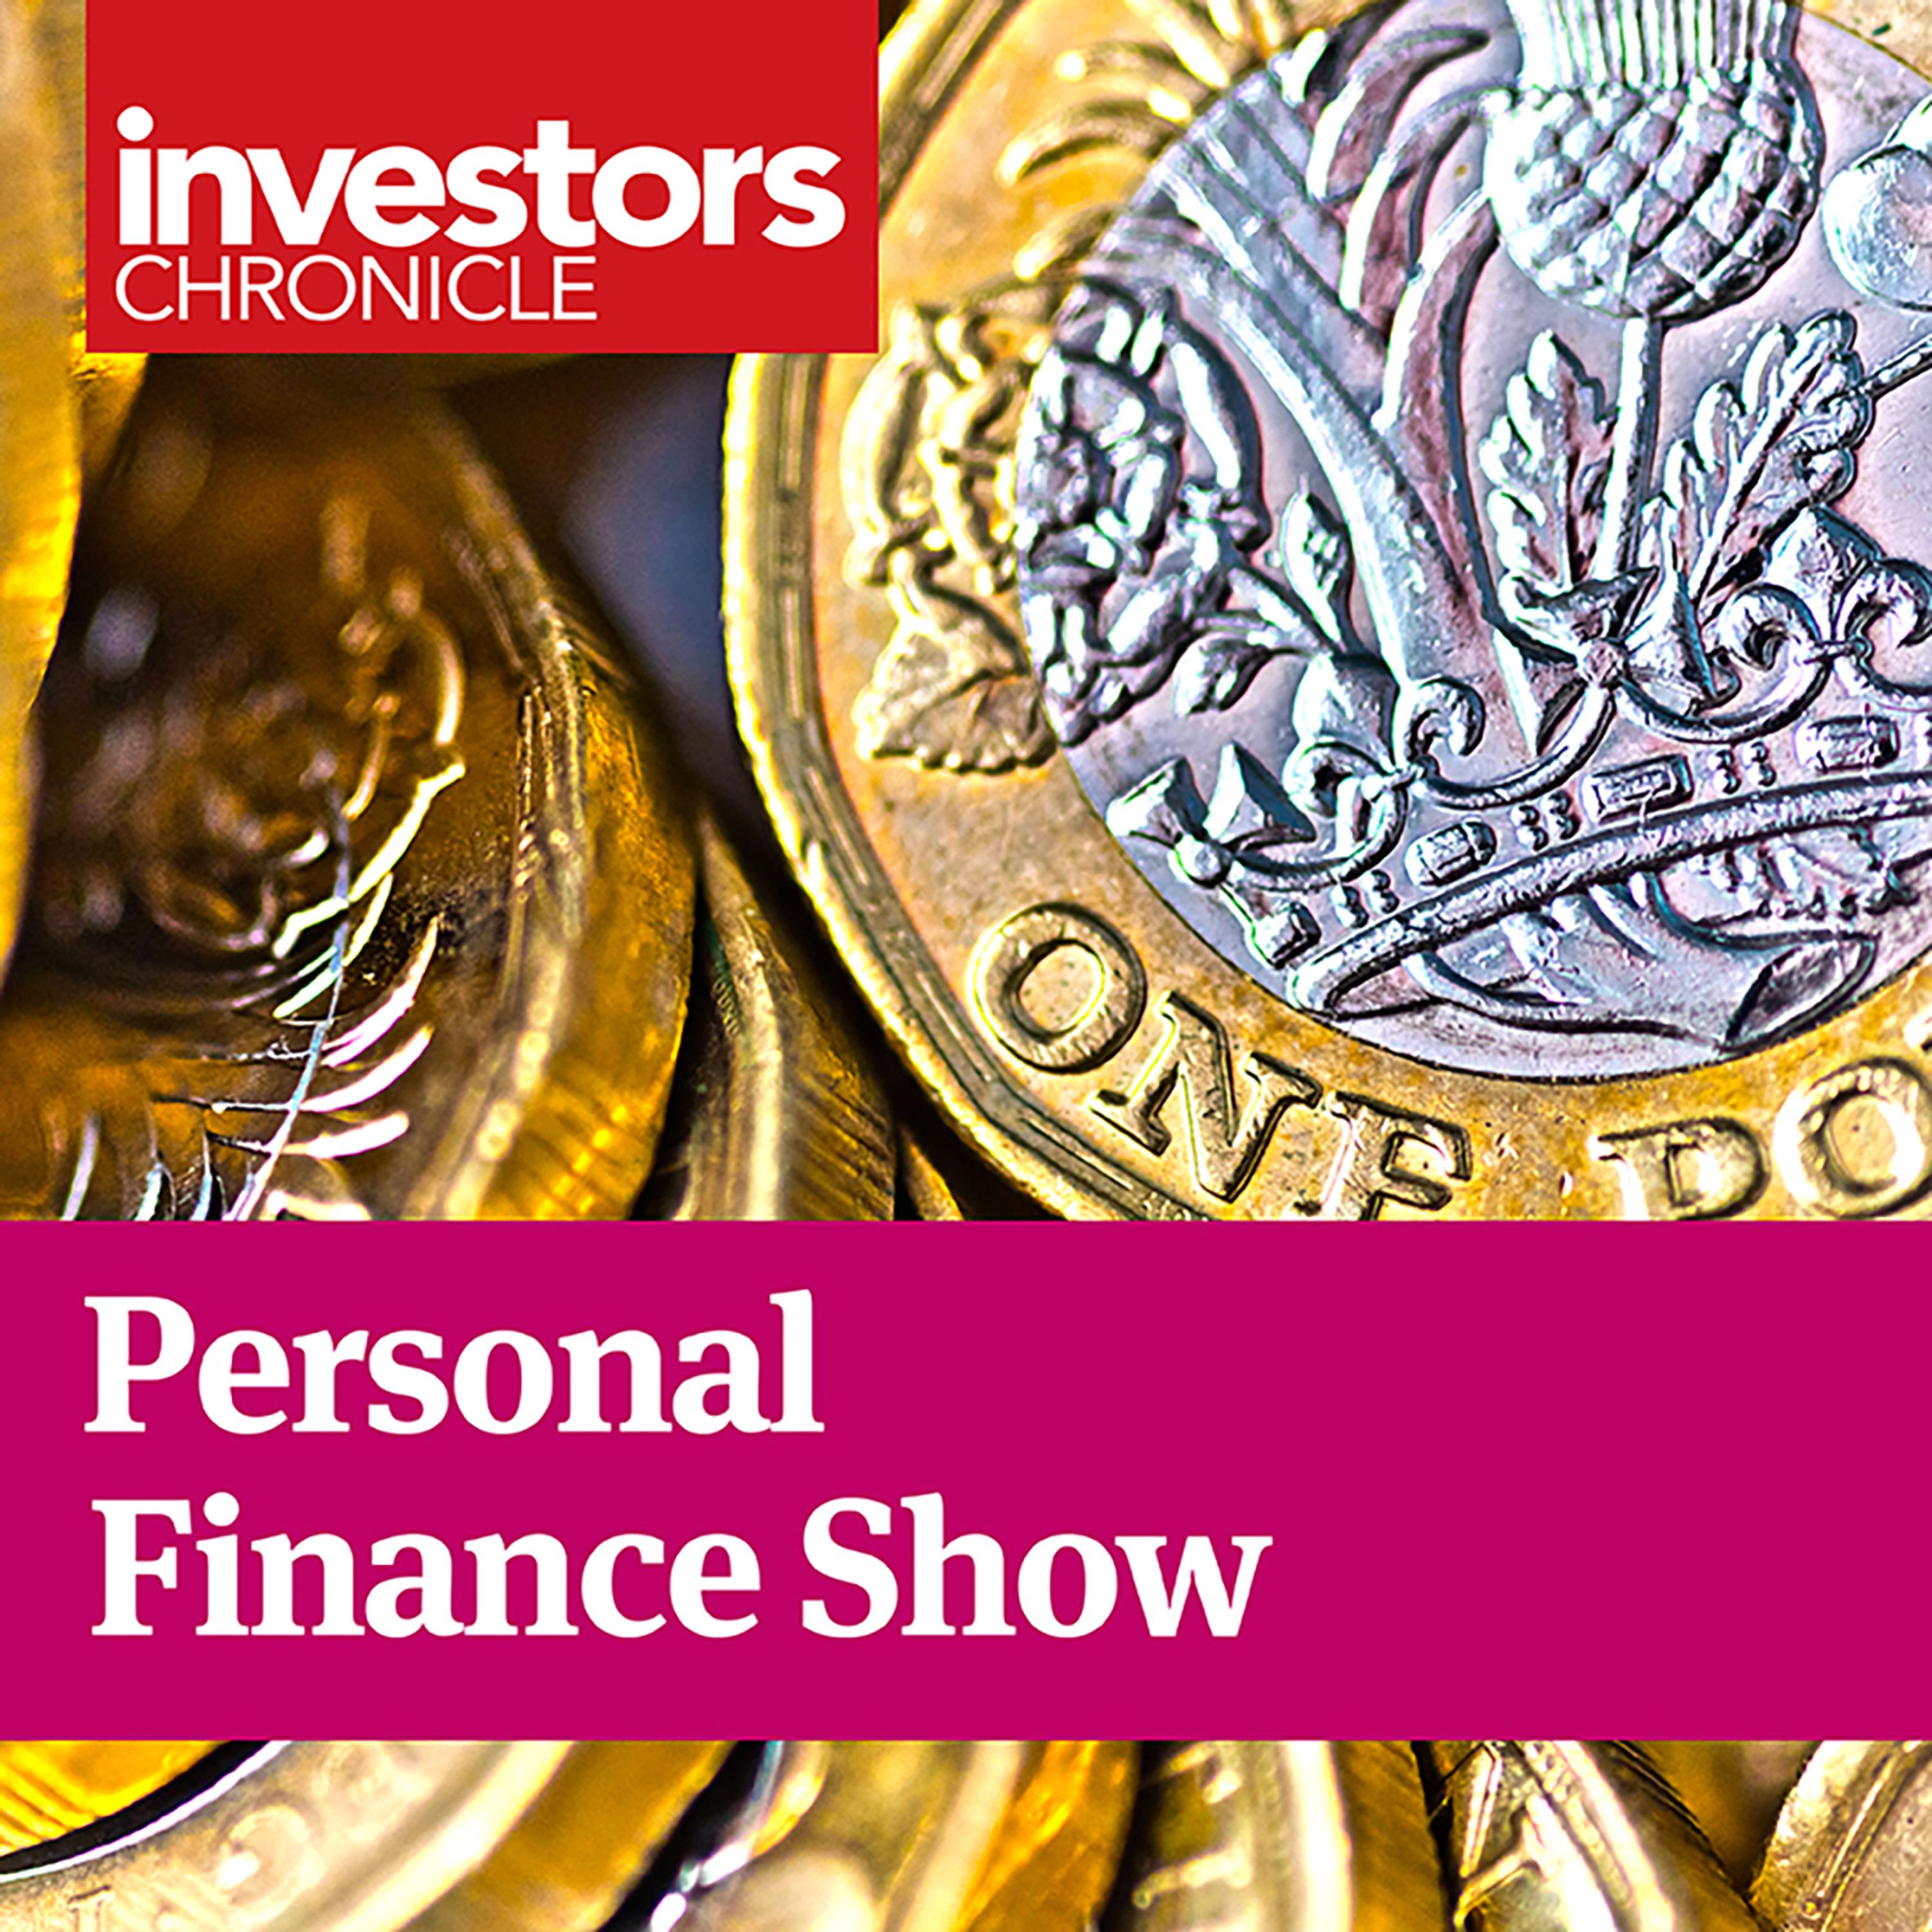 Personal Finance Show: Benefits of biotech and diversifying income